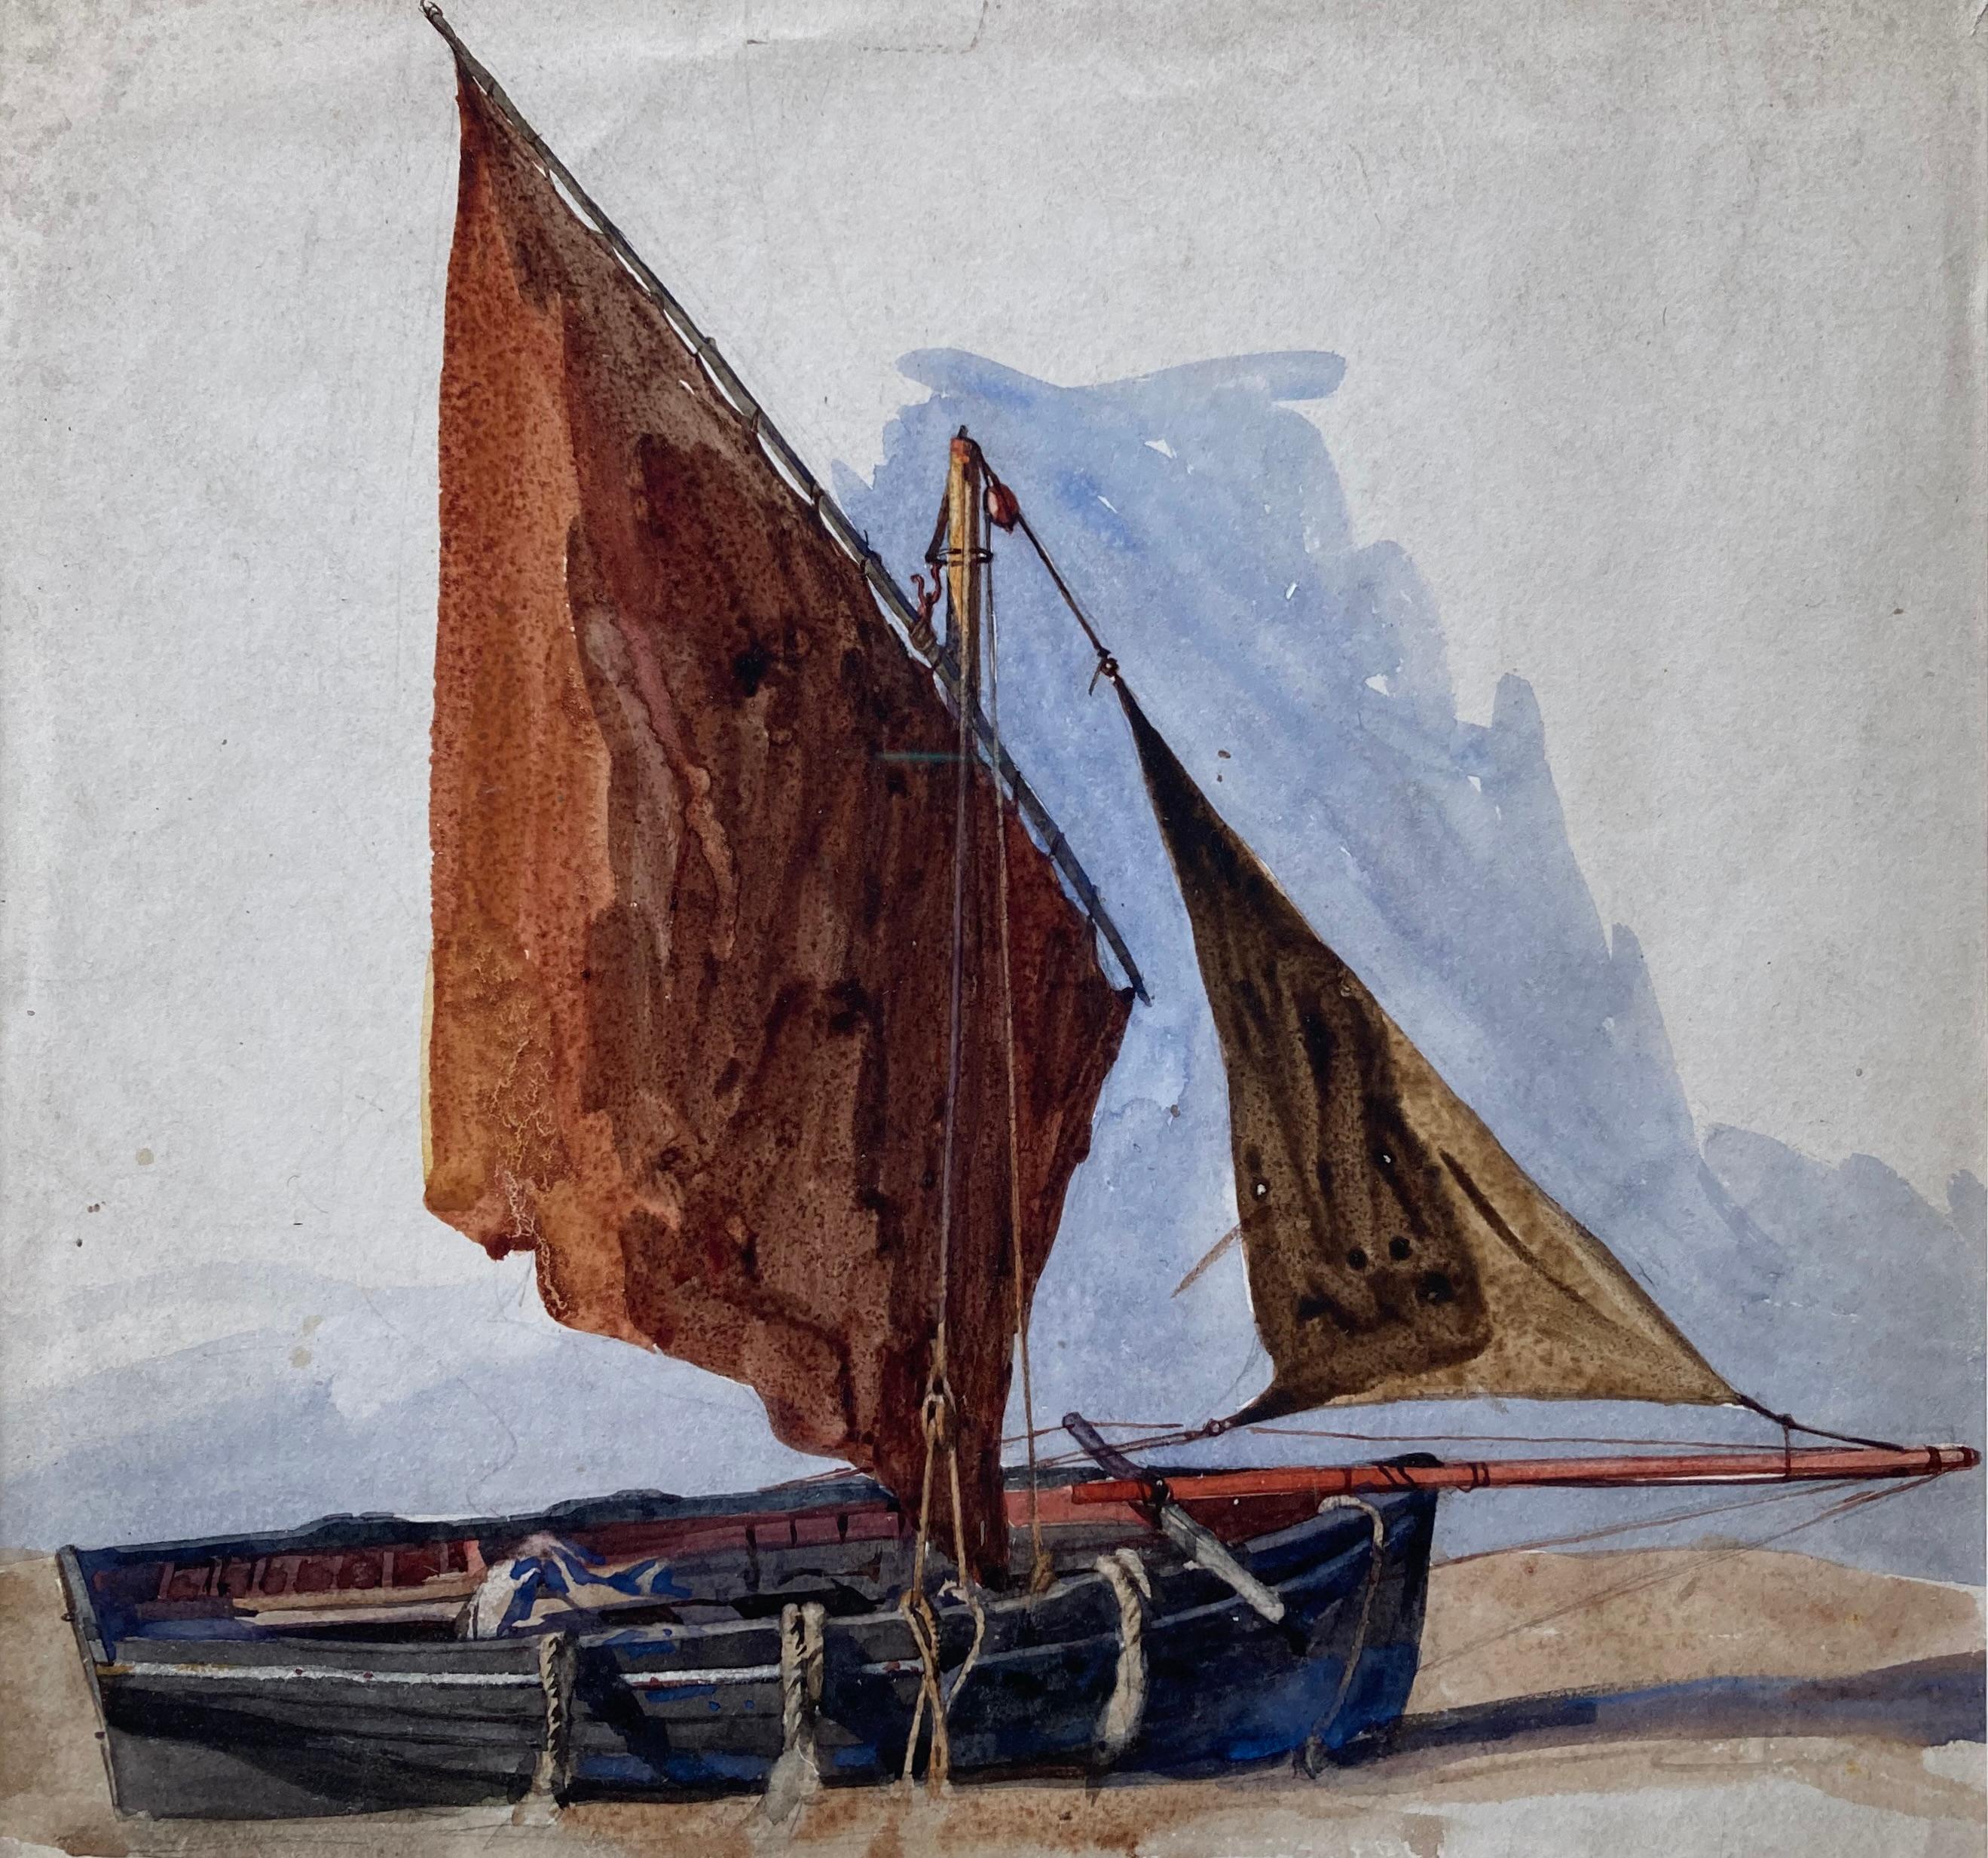 Cotman marine watercolor of sailing boat on the beach - Art by Frederick George Cotman